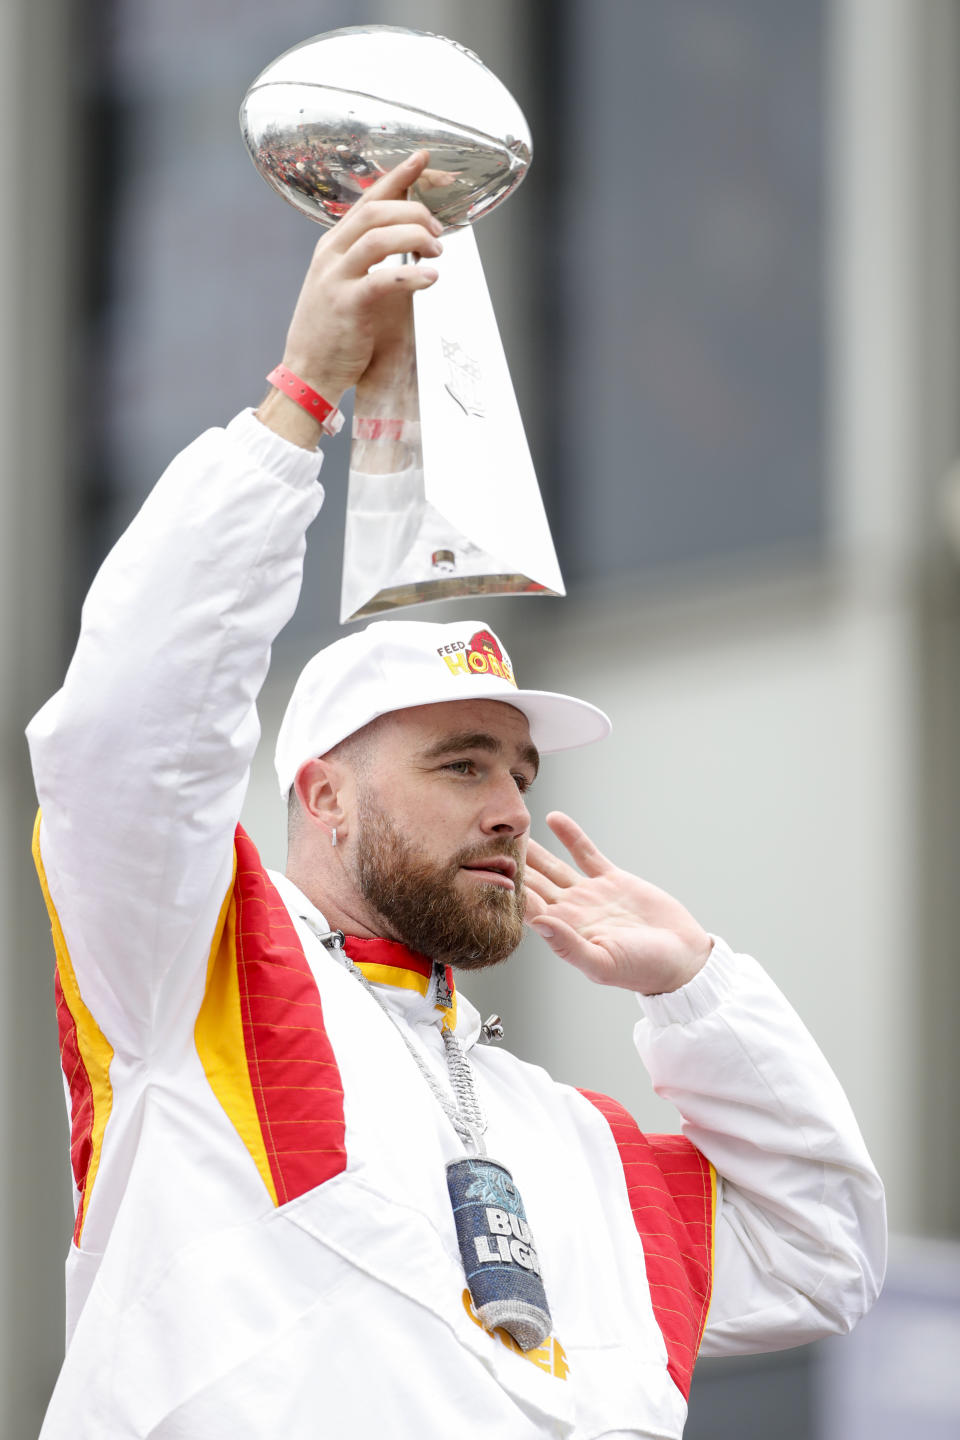 Travis Kelce takes part in the Kansas City Chiefs' victory celebration and parade in Kansas City, Mo., Wednesday, Feb. 15, 2023, following the Chiefs' win over the Philadelphia Eagles Sunday in the NFL Super Bowl 57 football game. (AP Photo/Colin E. Braley)